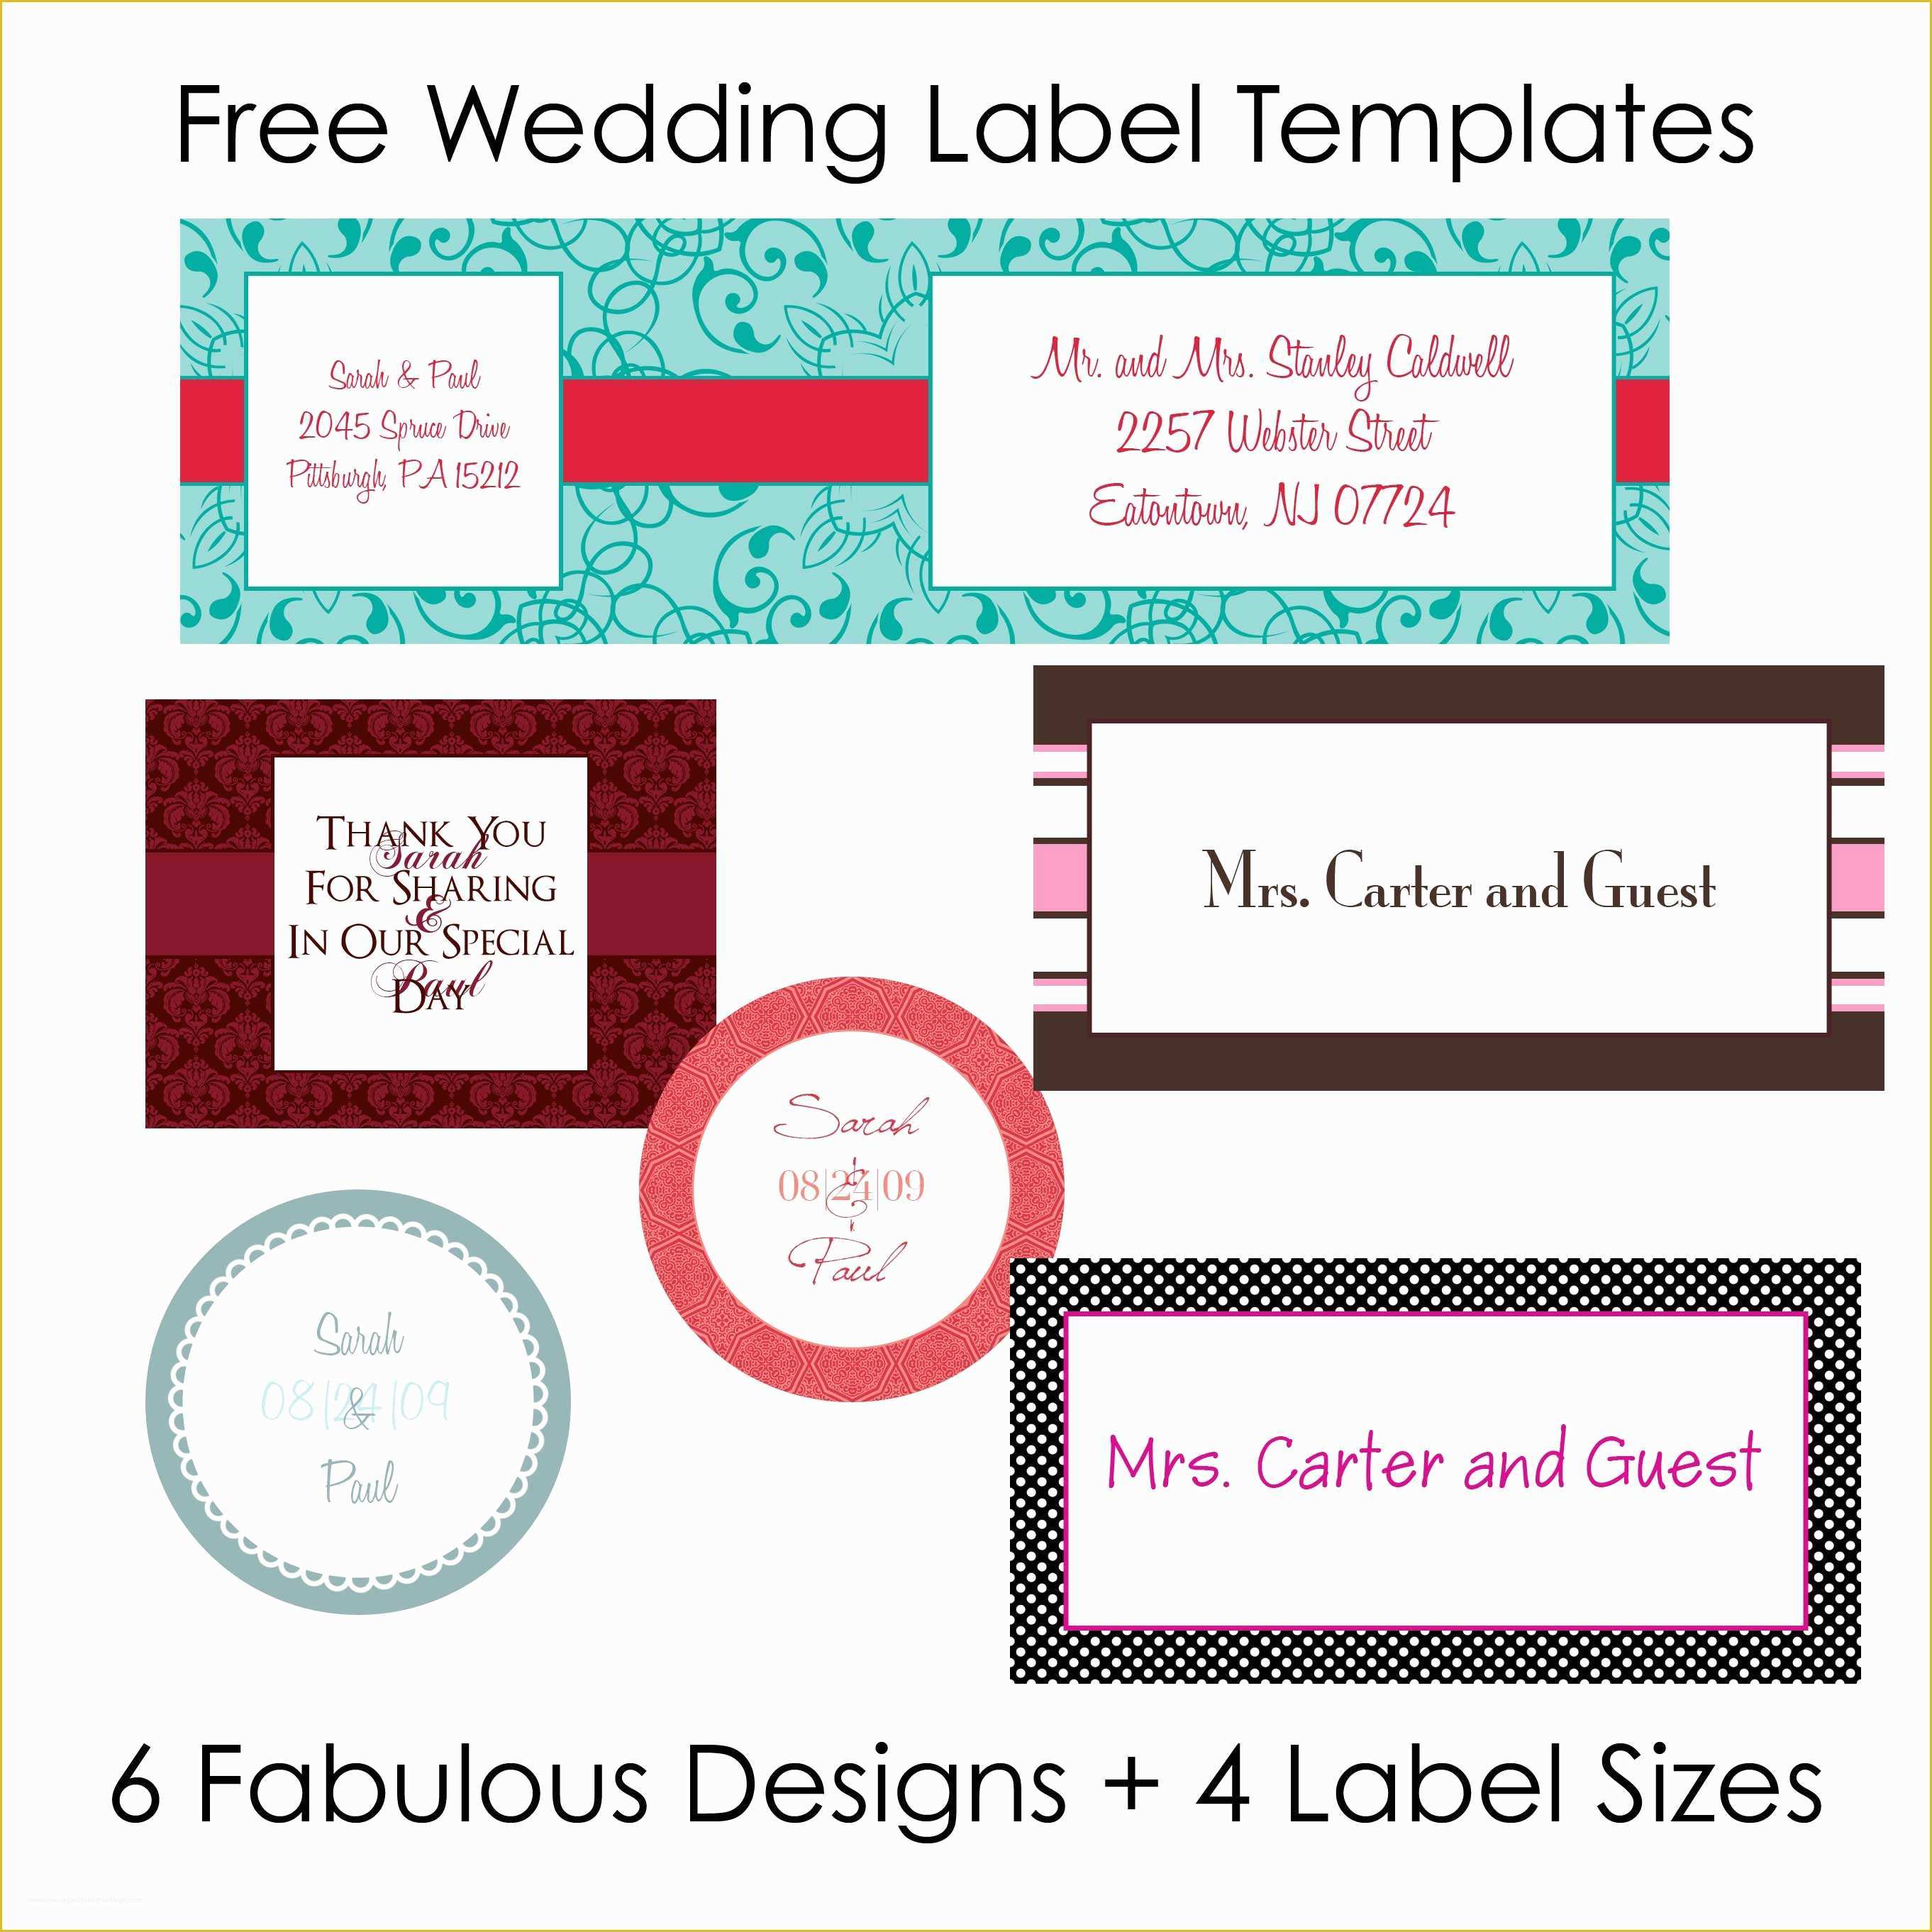 Free Online Label Templates Of Diy Wedding Labels for Free Collection Two